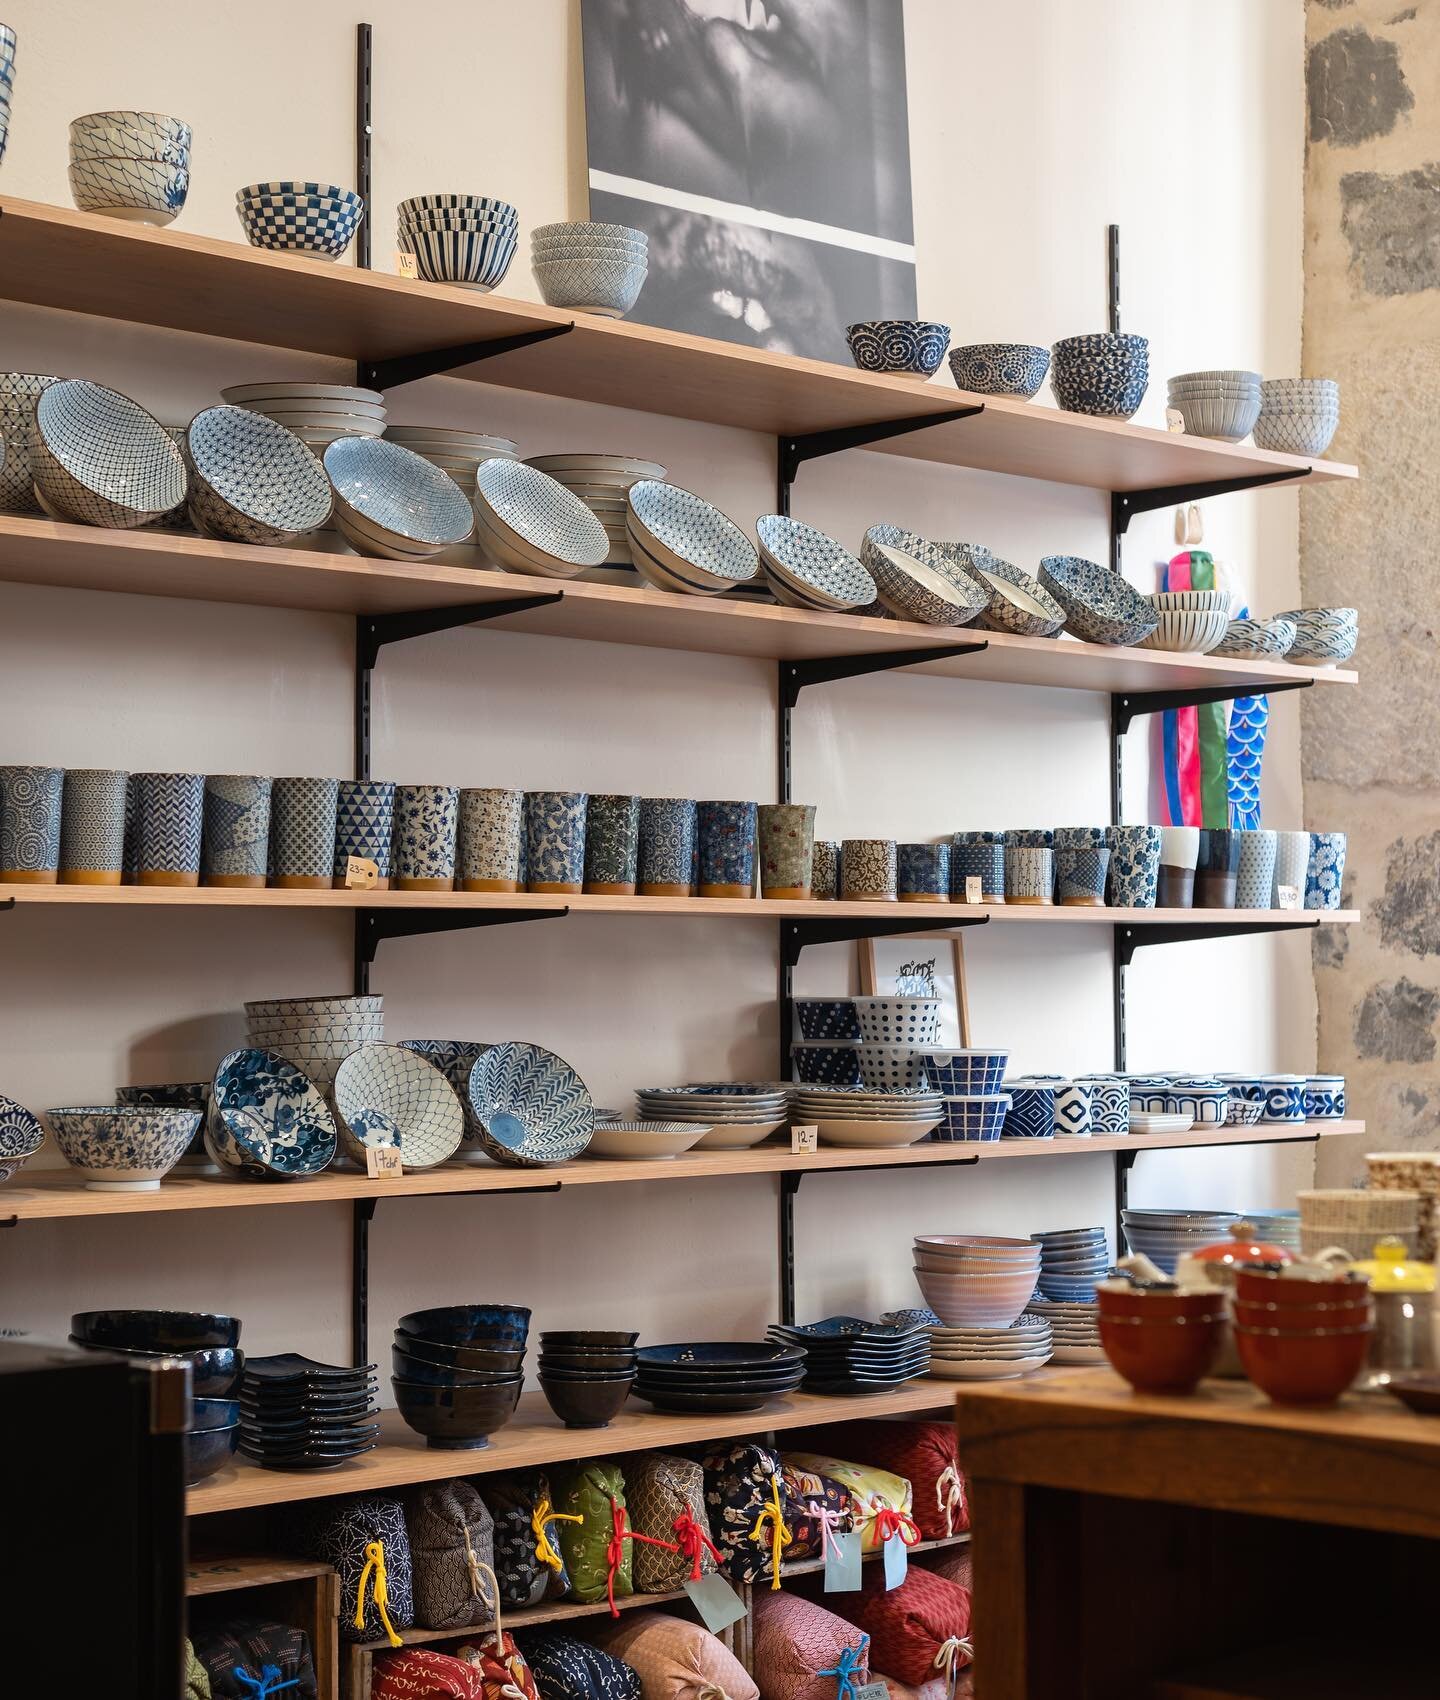 The small independent concept store of one of our customers @yugenlab.shop
.
#conceptstore #yugenlab #yugenlabtrade #boutique #geneva #geneve #ceramicart #ceramics #independente #artdelatable #vaisselle #porcelain #magasin #decor #decorationjaponaise